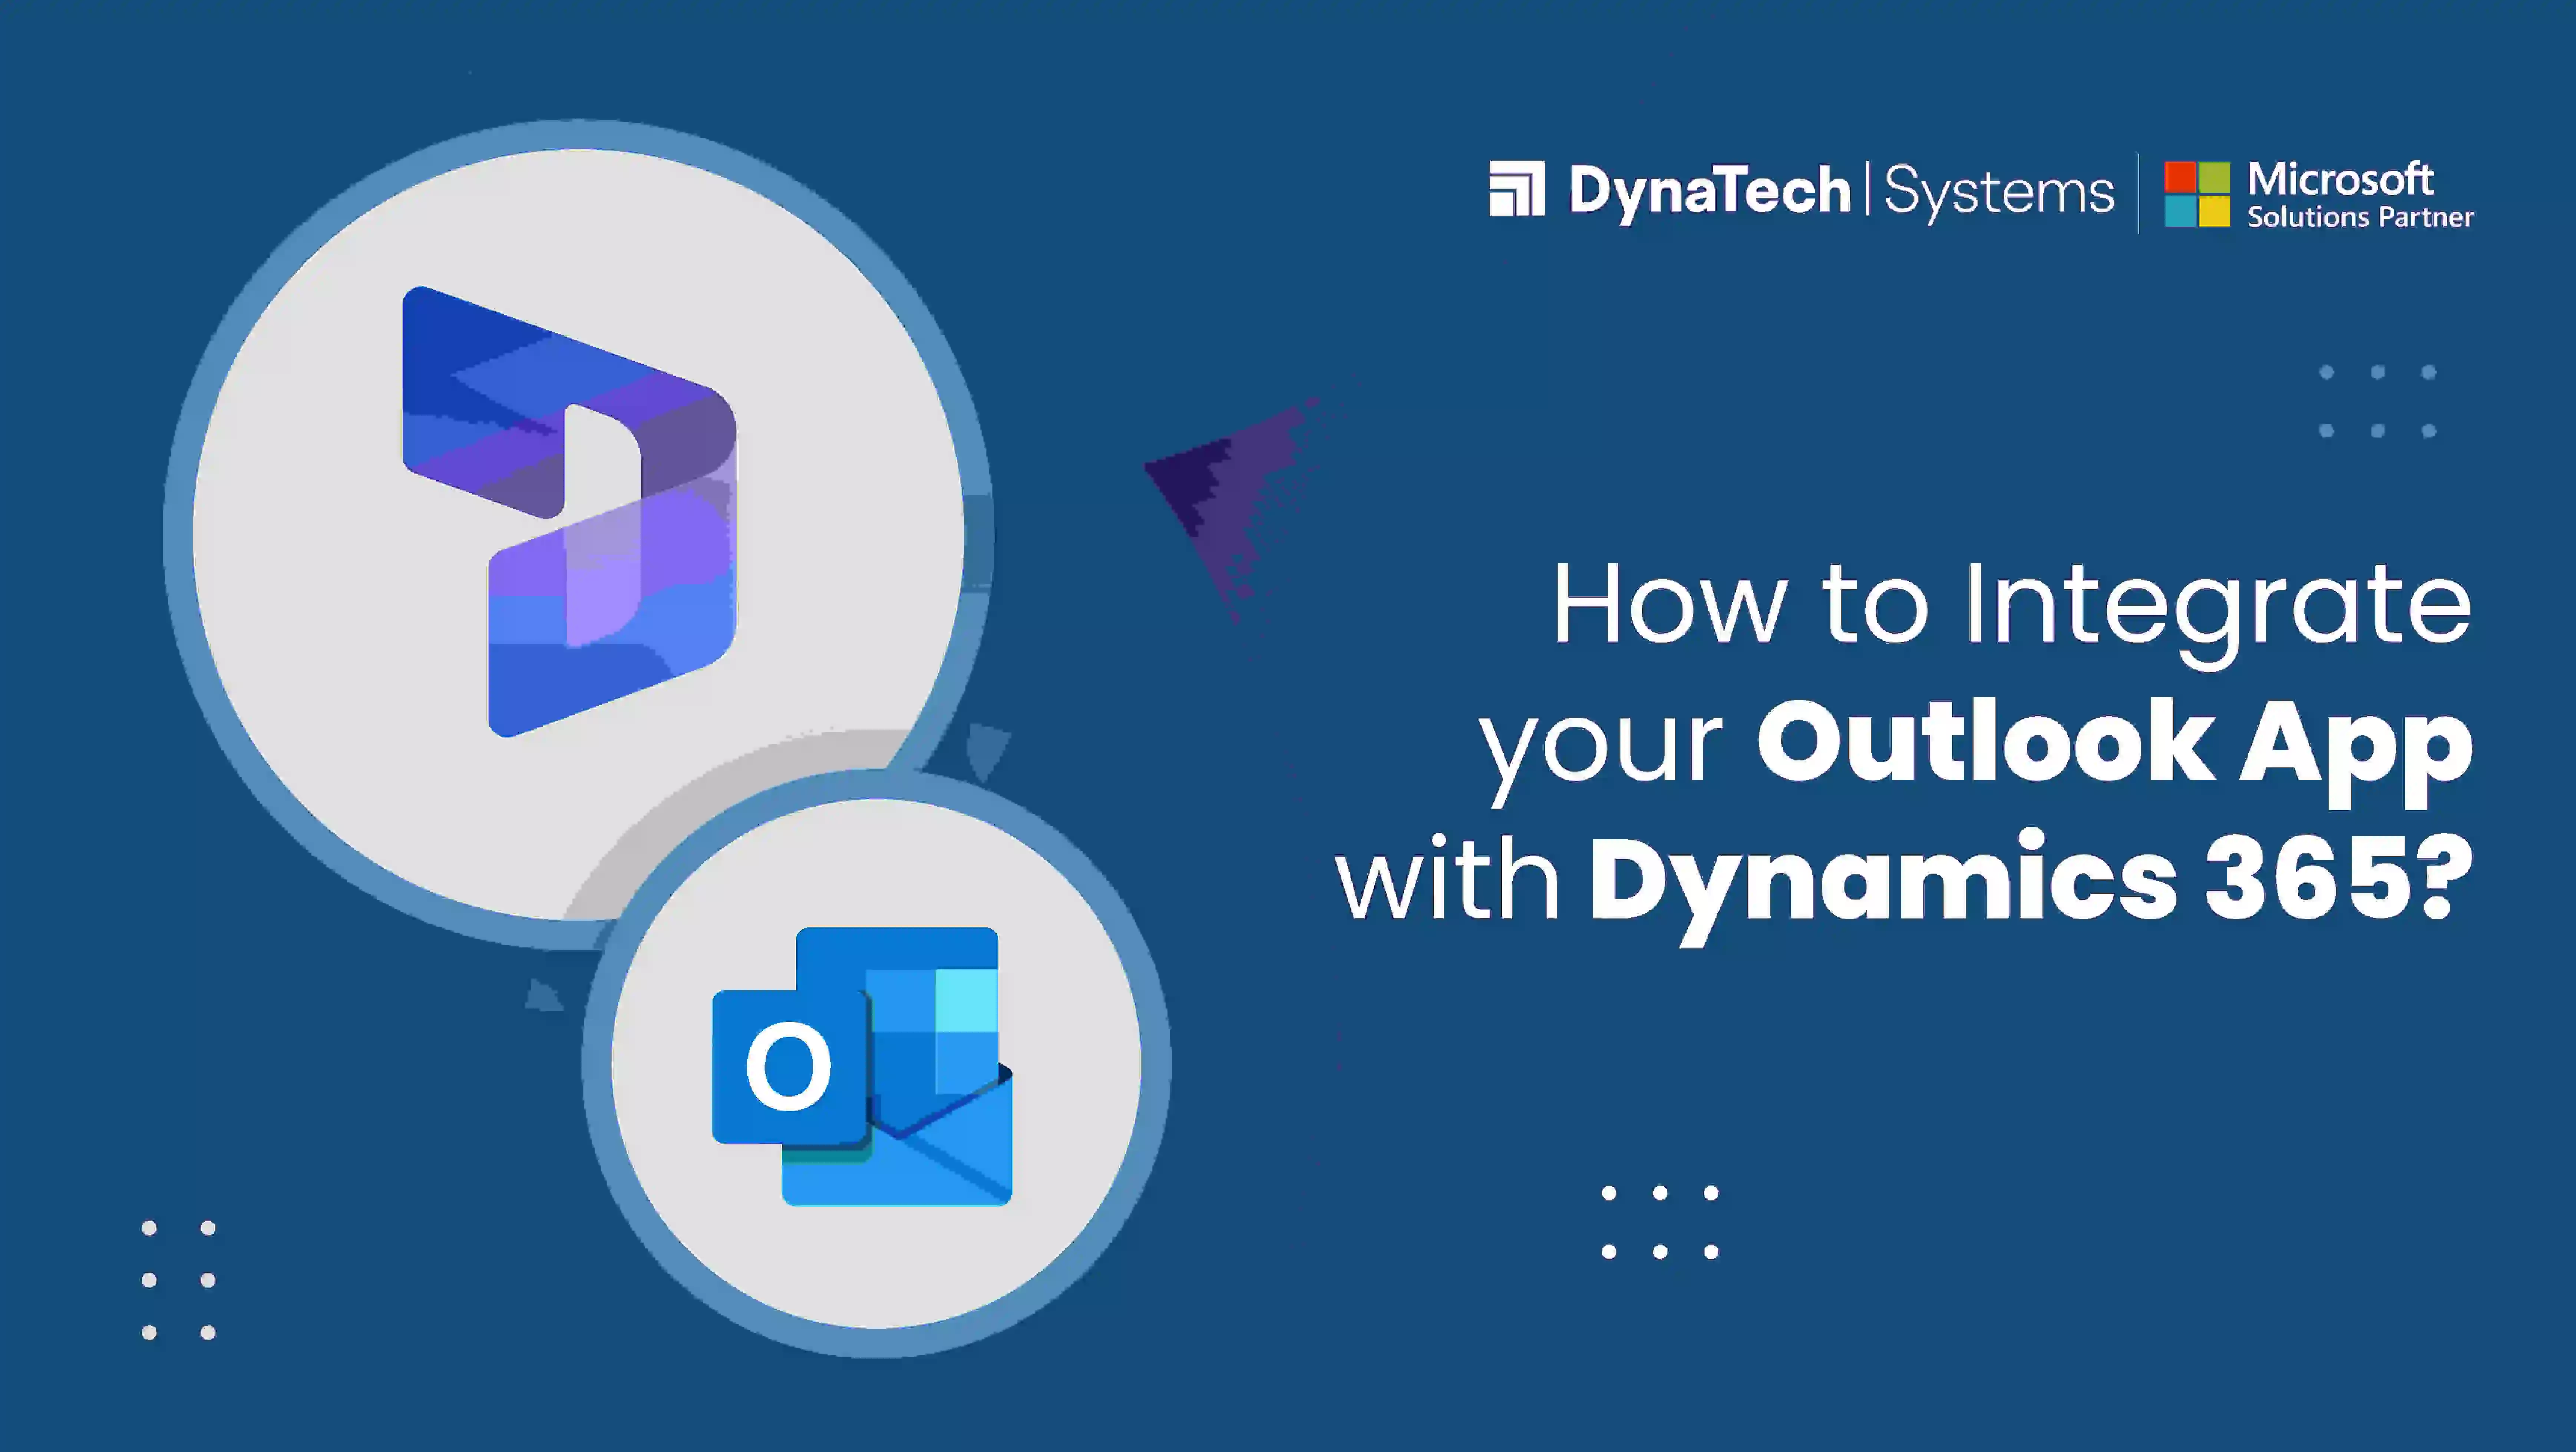 How to Integrate your Outlook App with Dynamics 365?